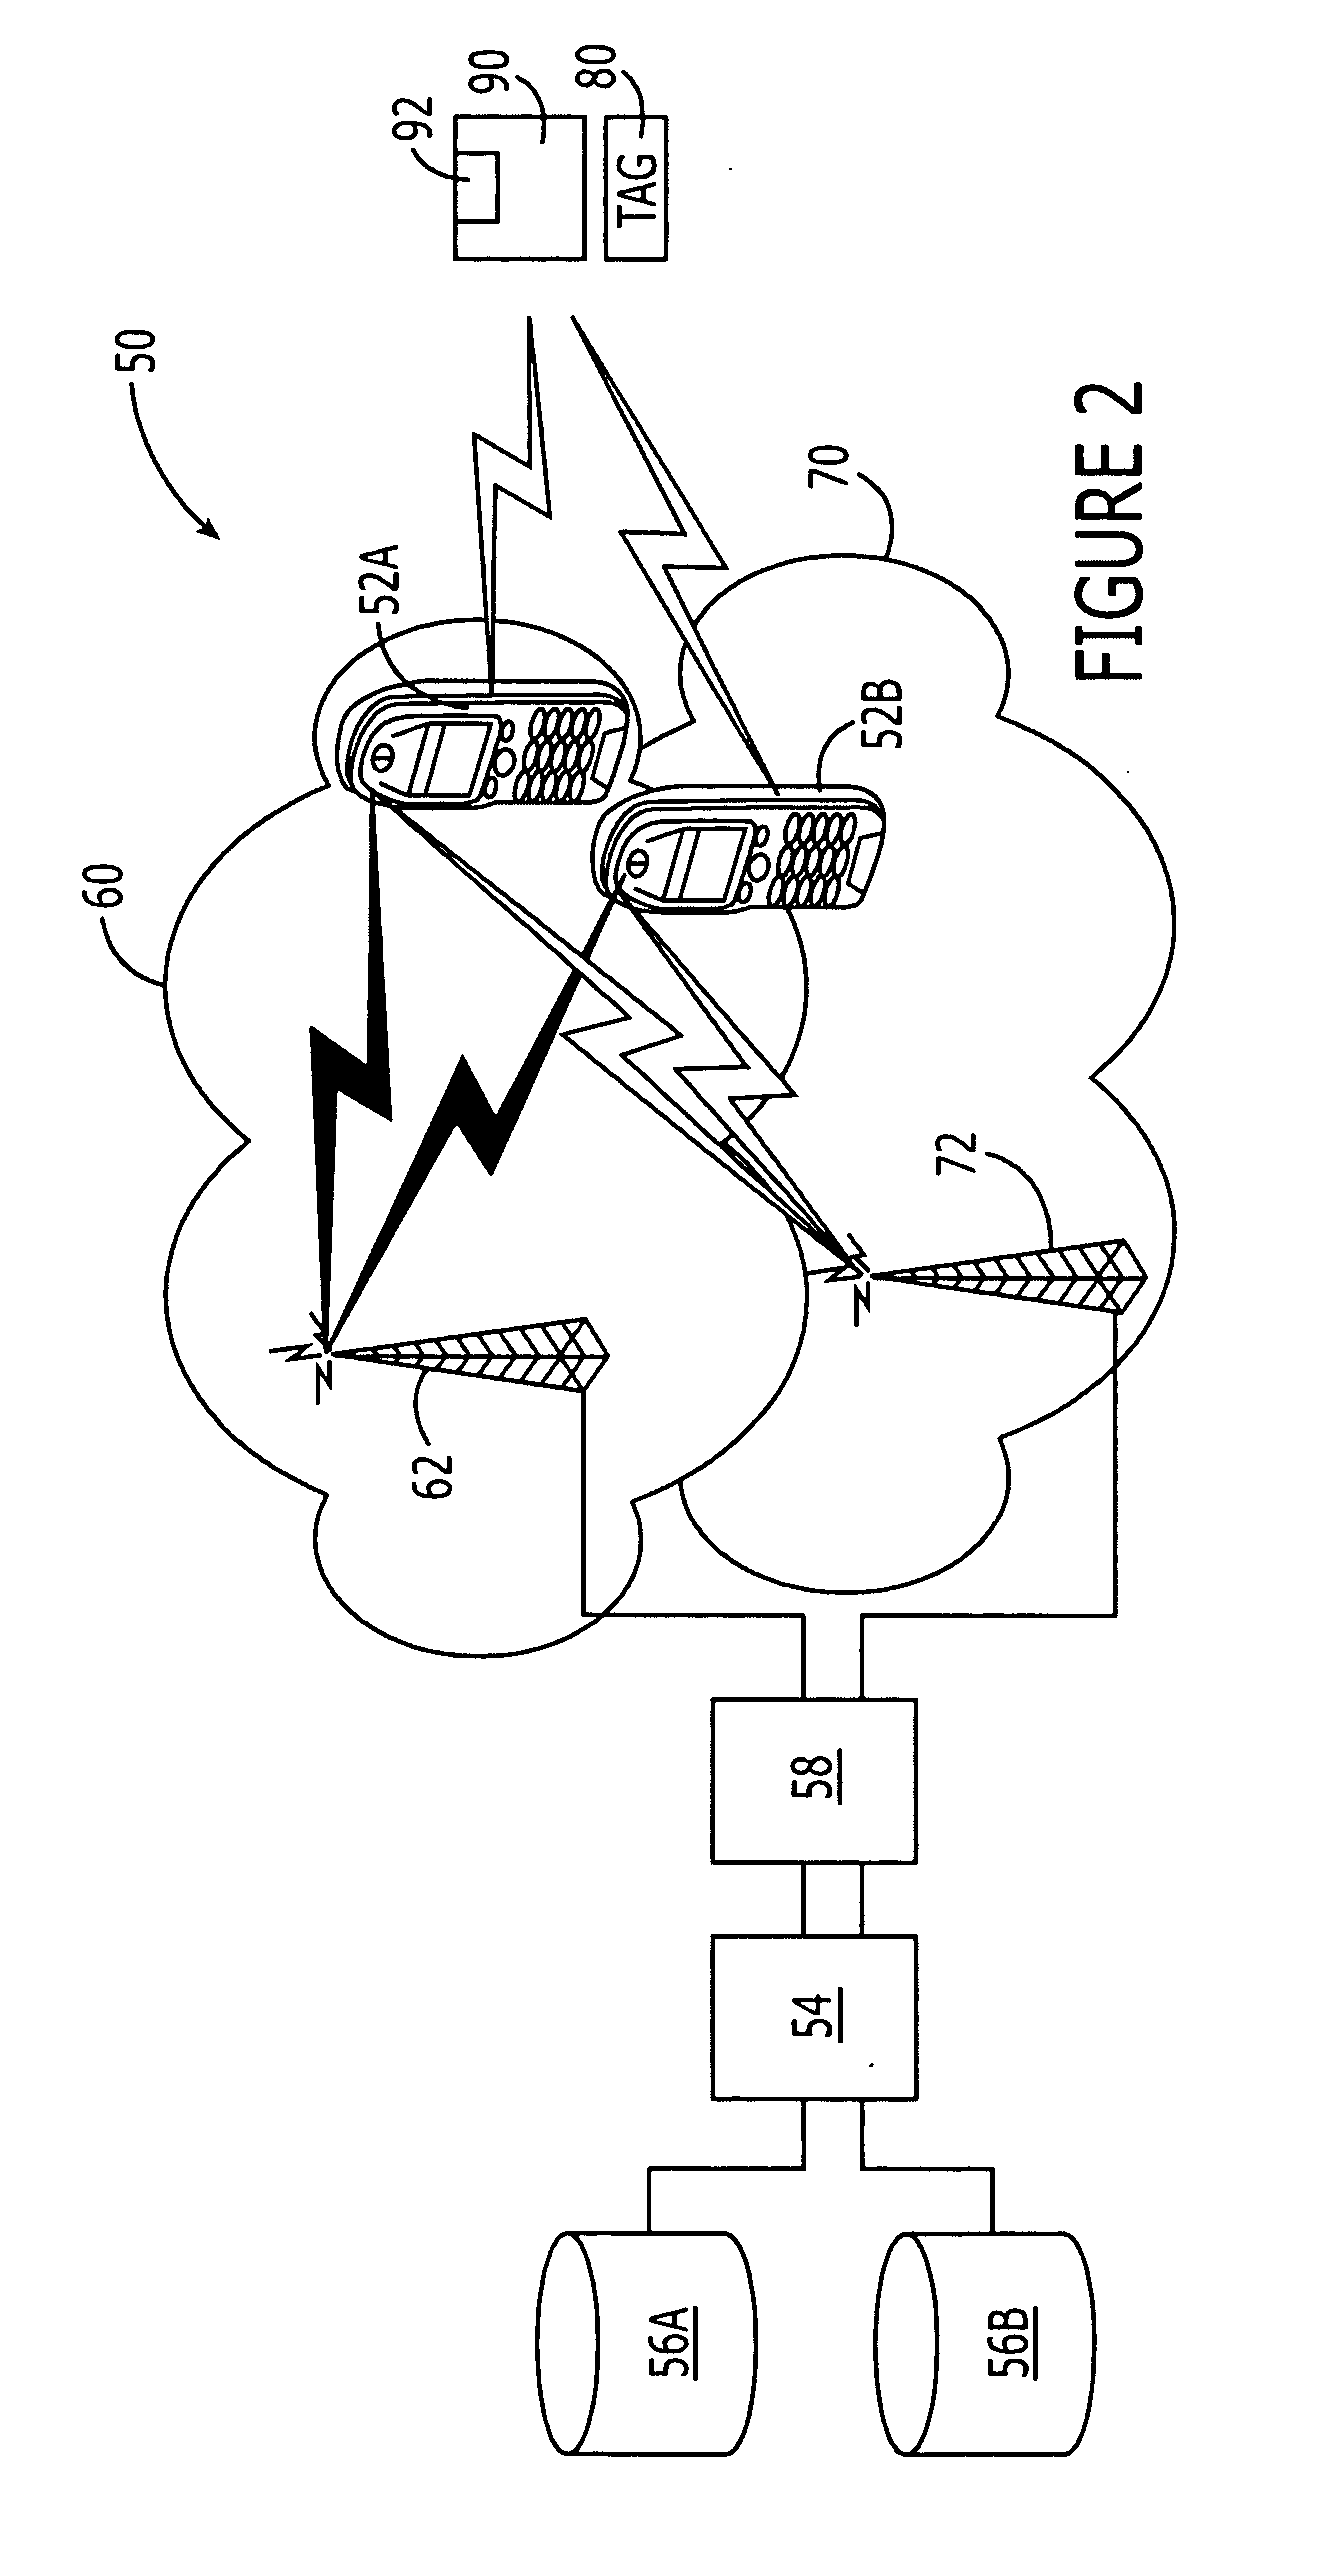 Docking of short-range wireless communication tags with mobile terminals